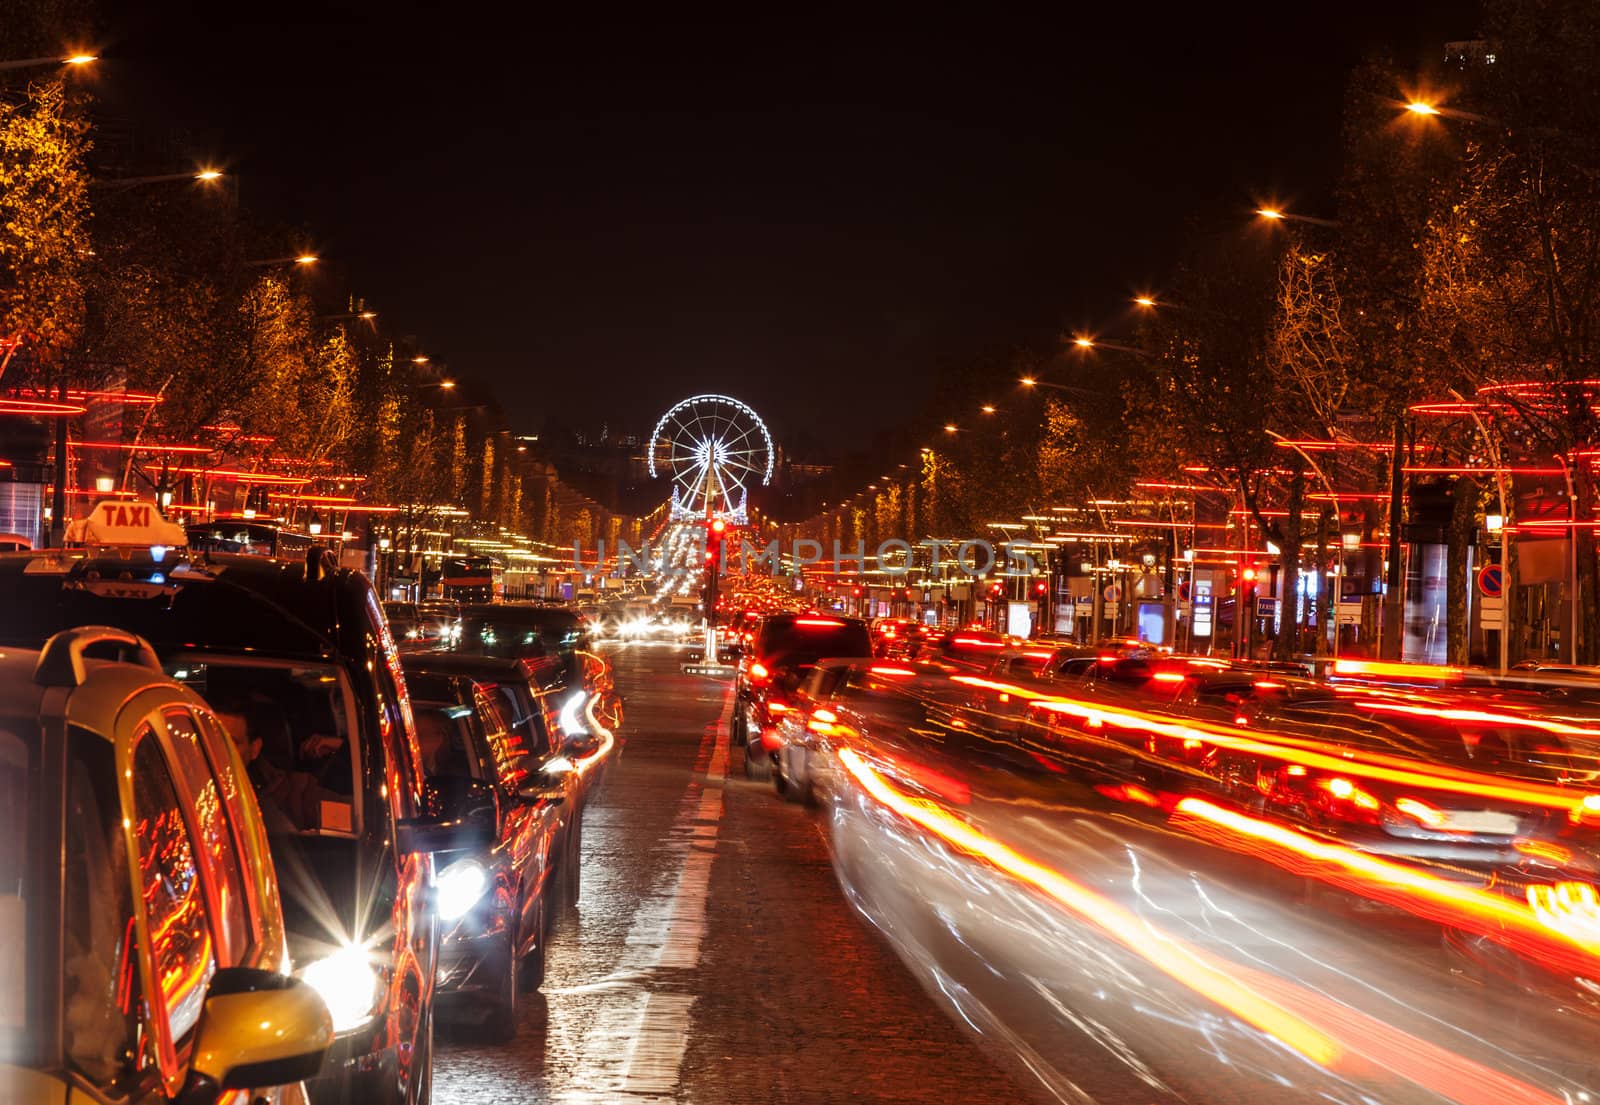 December illumination and traffic lights on the Avenue des Champs-Élysées in Paris,Europe. In the distance you can see the Ferry wheel located in Place de la Concorde.